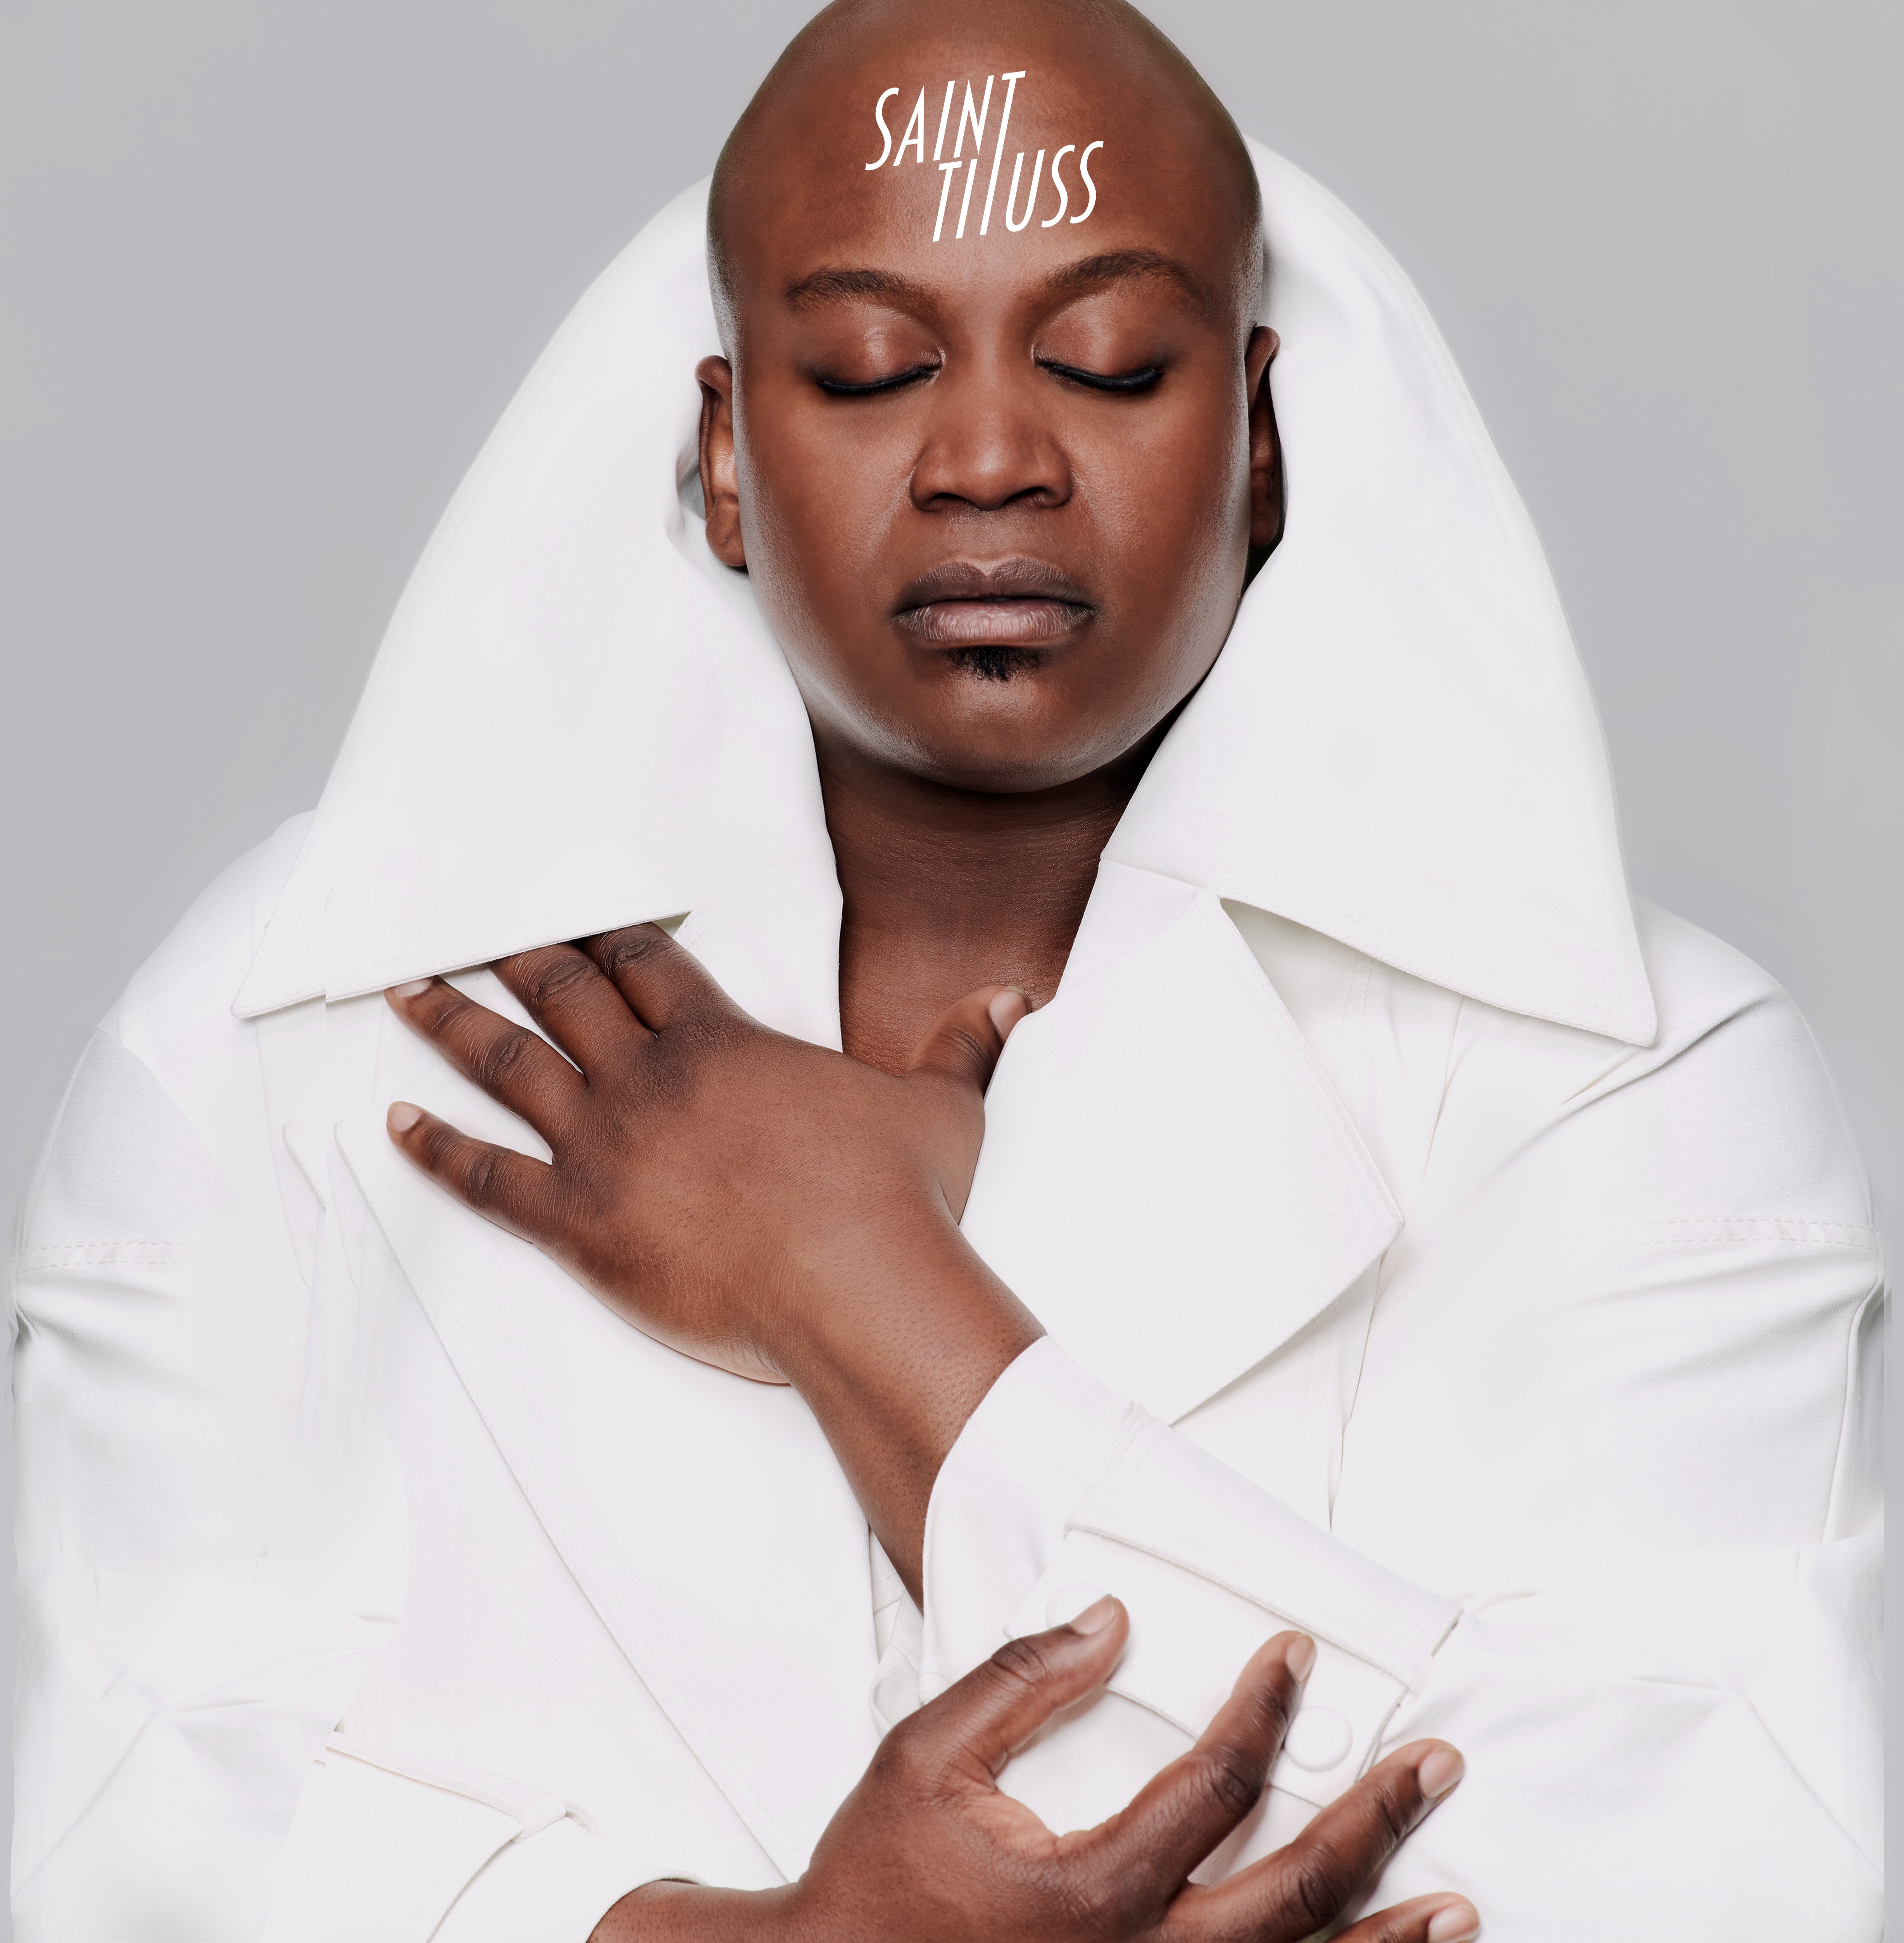 Tituss Burgess Is Full Of Love And Optimism On New EP ‘Saint Tituss’